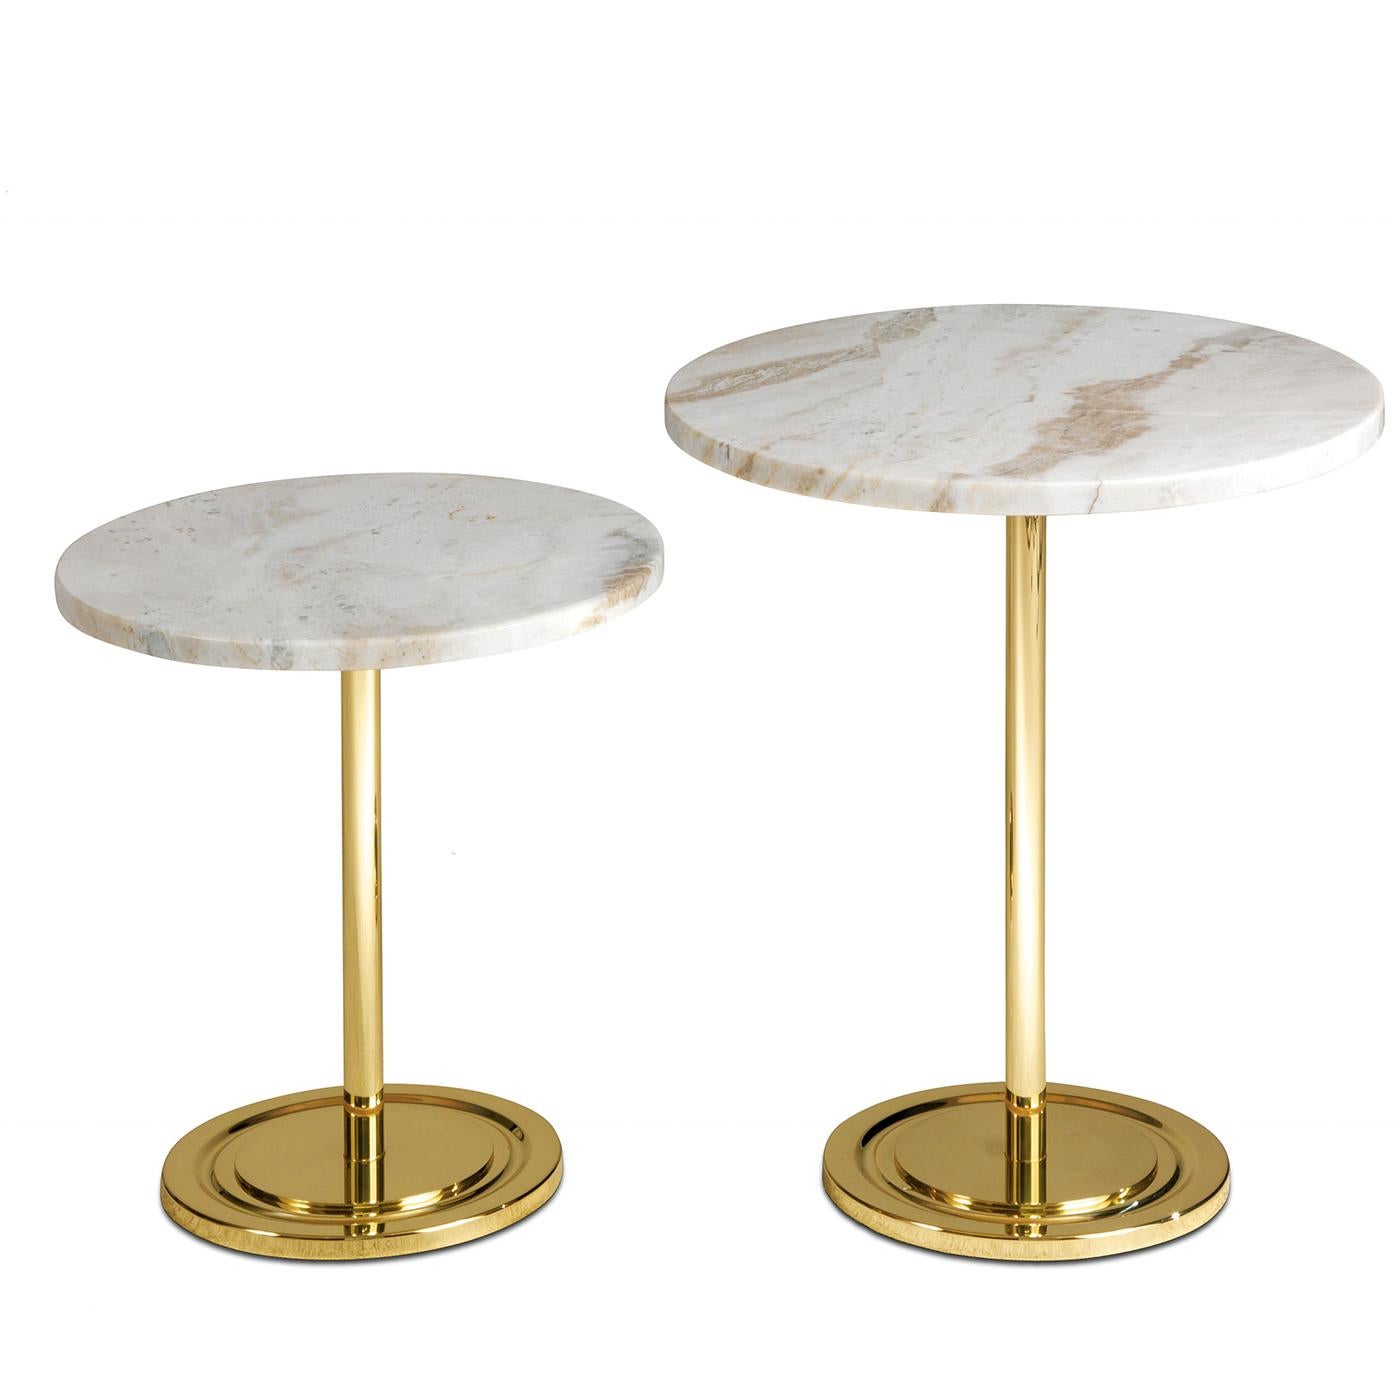 This elegant and versatile side table will be a precious addition to both a modern and a classic home, thanks to its timeless allure and the unique combination of traditional materials and contemporary minimalism. The round base and central leg,